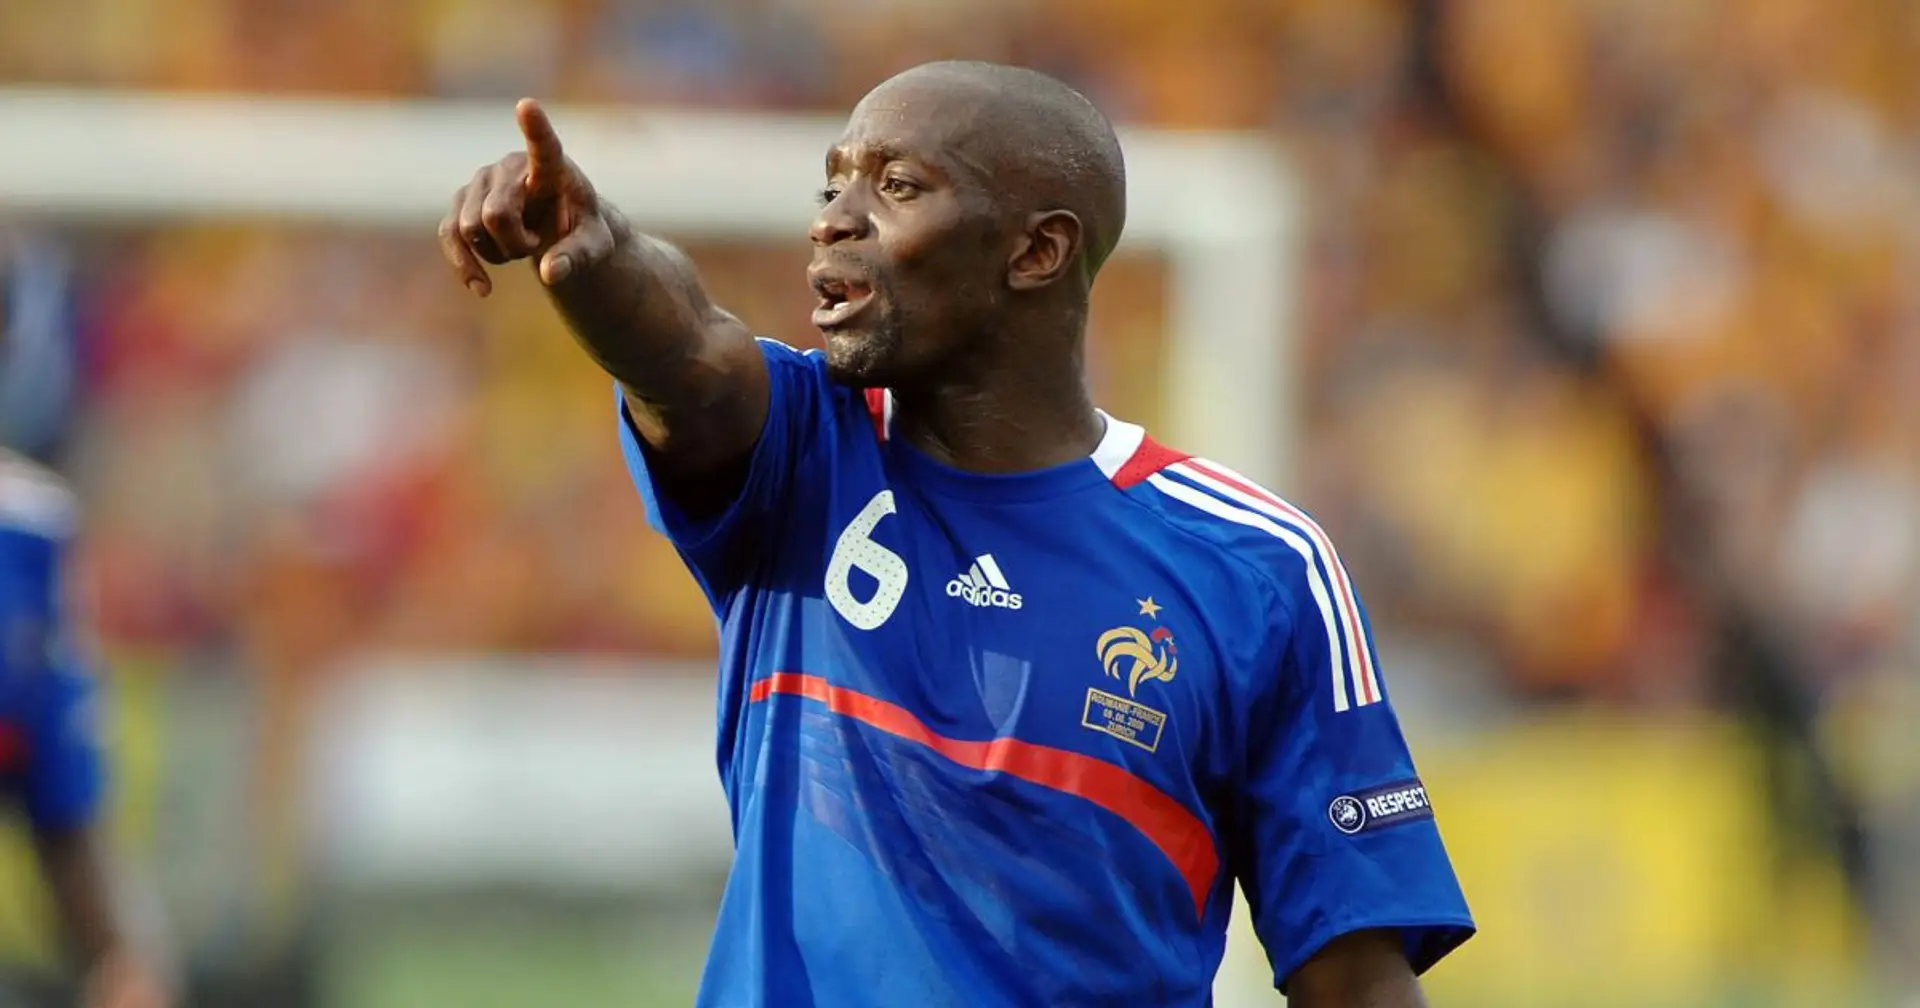 'Brazil or not, I don't give a f***': Why Claude Makelele was made different 